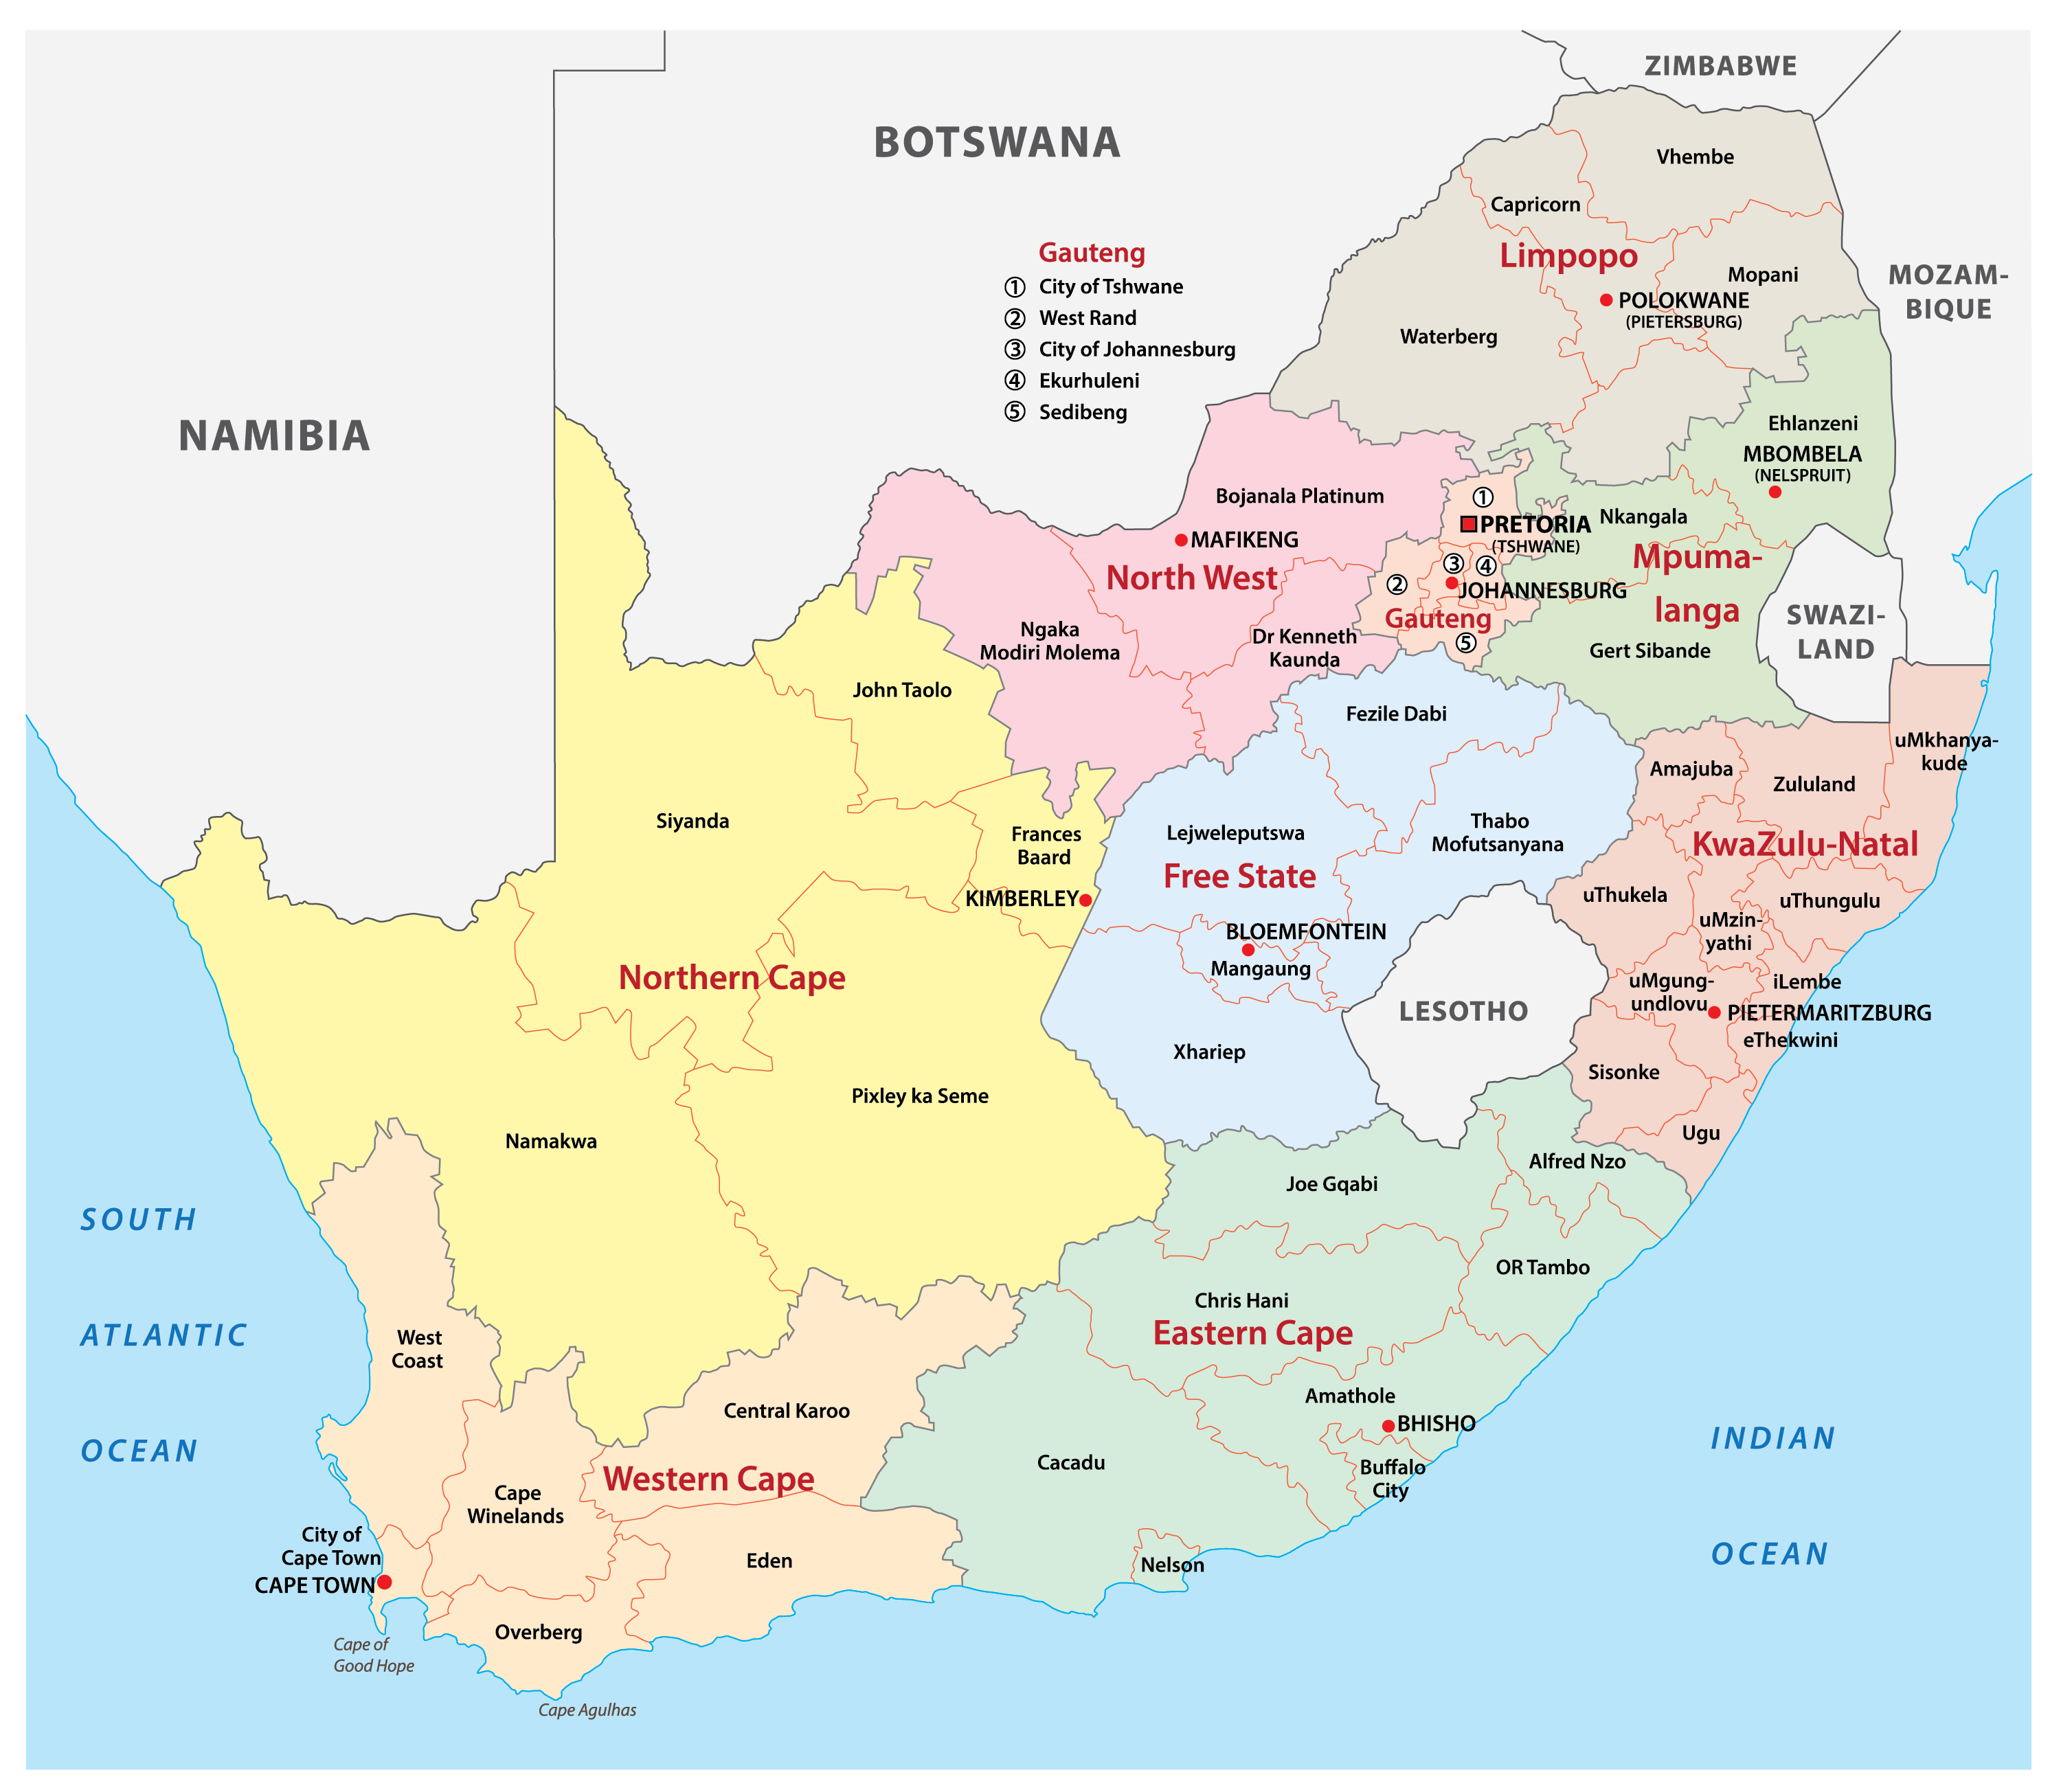 Free Map Of South Africa South Africa Maps & Facts - World Atlas